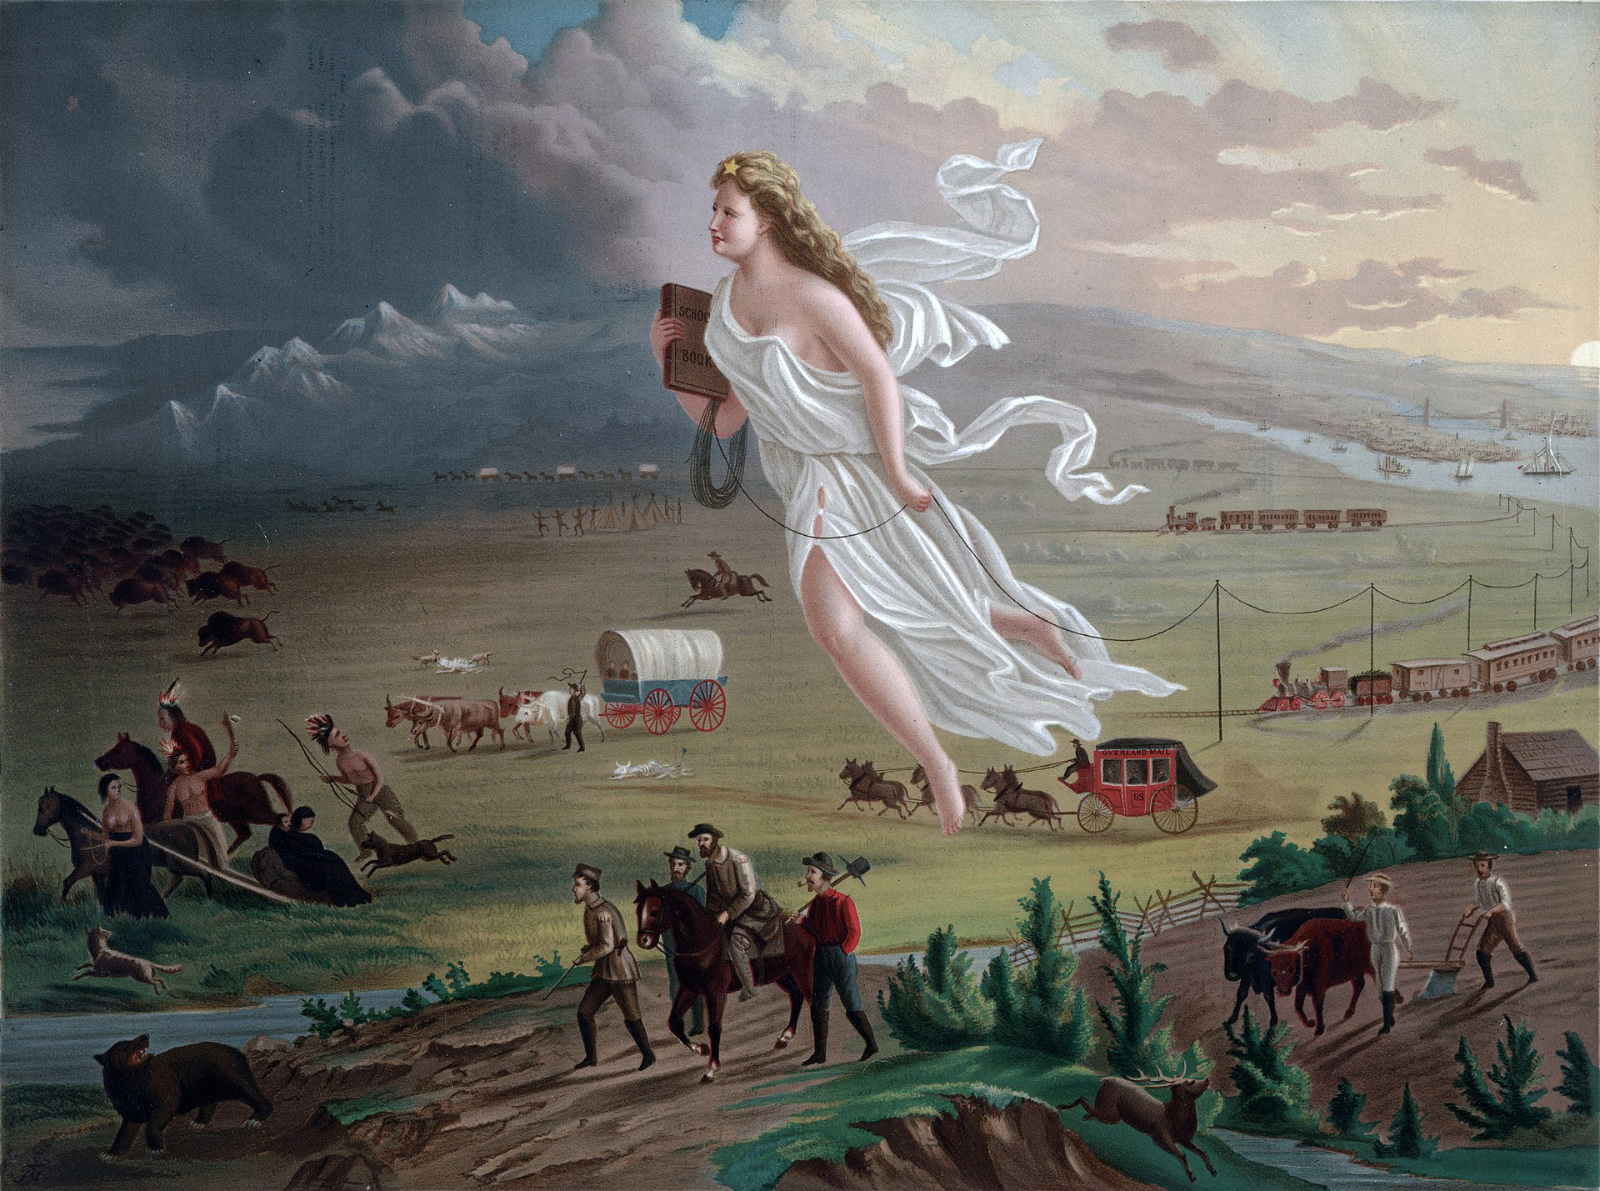 1872 painting "American progress": an outdoor scene with agricultural fields and a large meadow with mountains in the background;  farmers, hunters, horse-drawn carriages and trains all move from right to left to show the theme of manifest destiny;  in the center is a larger-than-life blonde woman representing the hypothetical blessing of manifest destiny